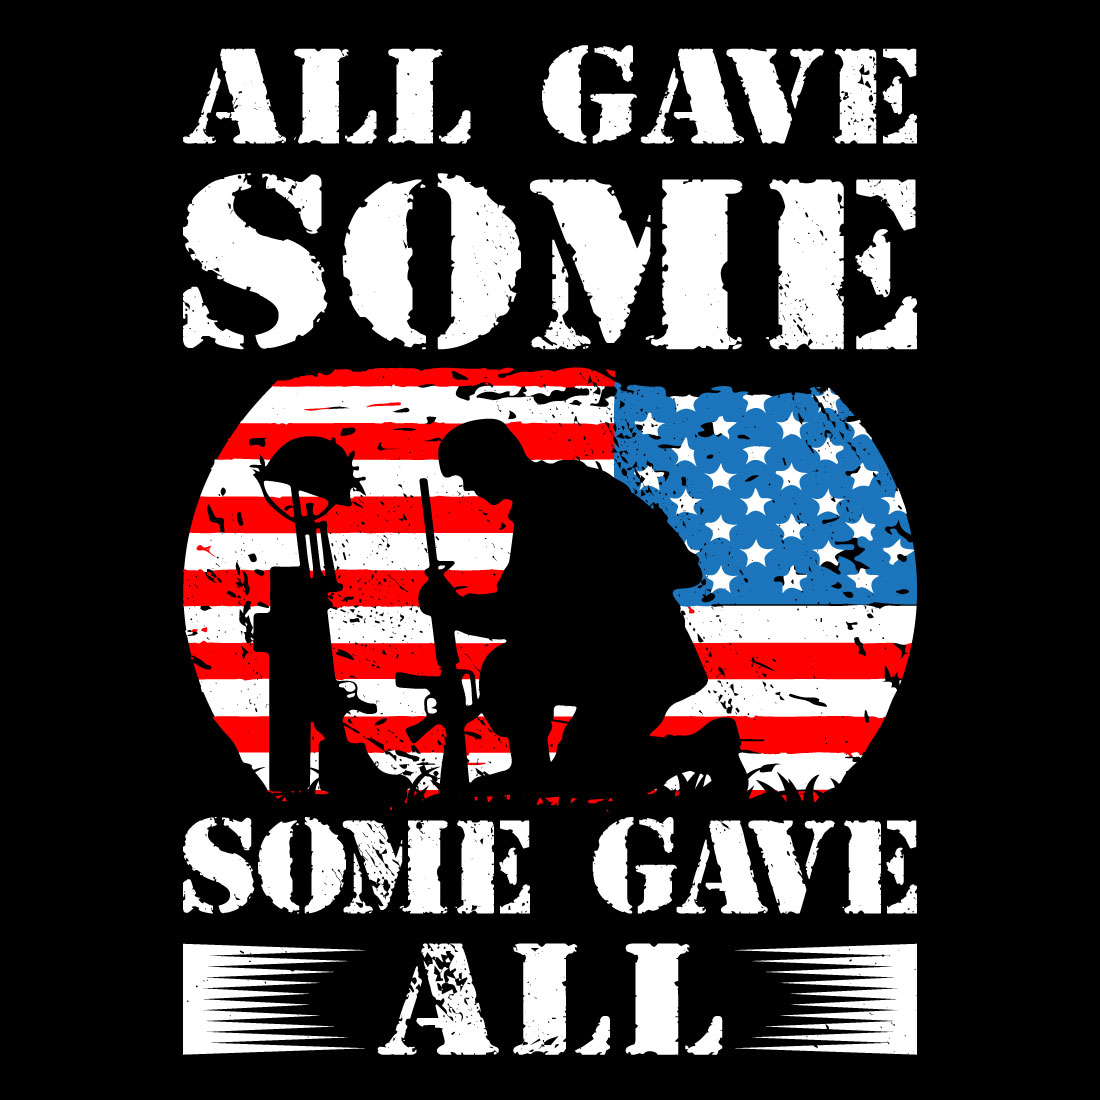 All gave some some gave all Veteran T-Shirt Design preview image.